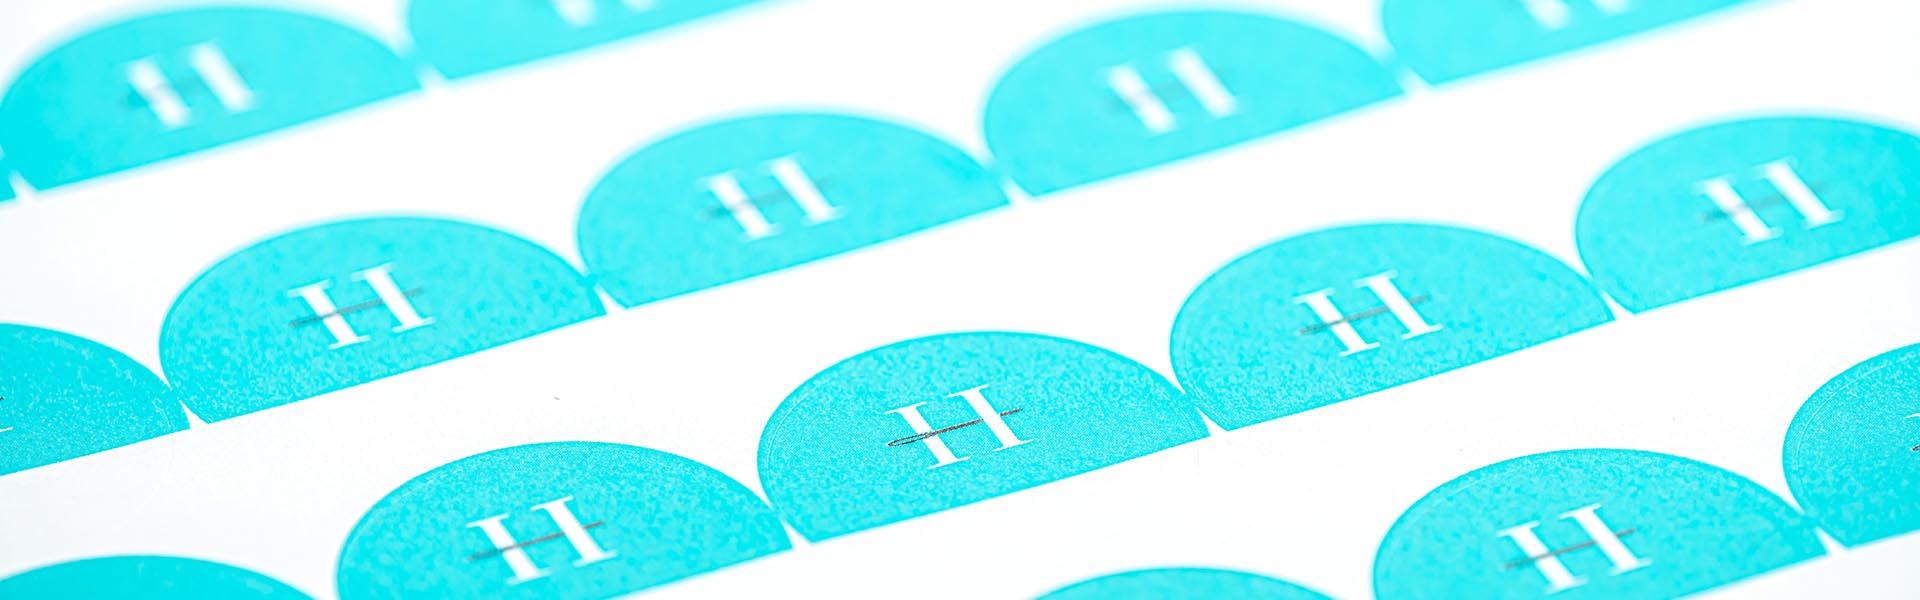 a row of blue circular stickers with the letter h on them